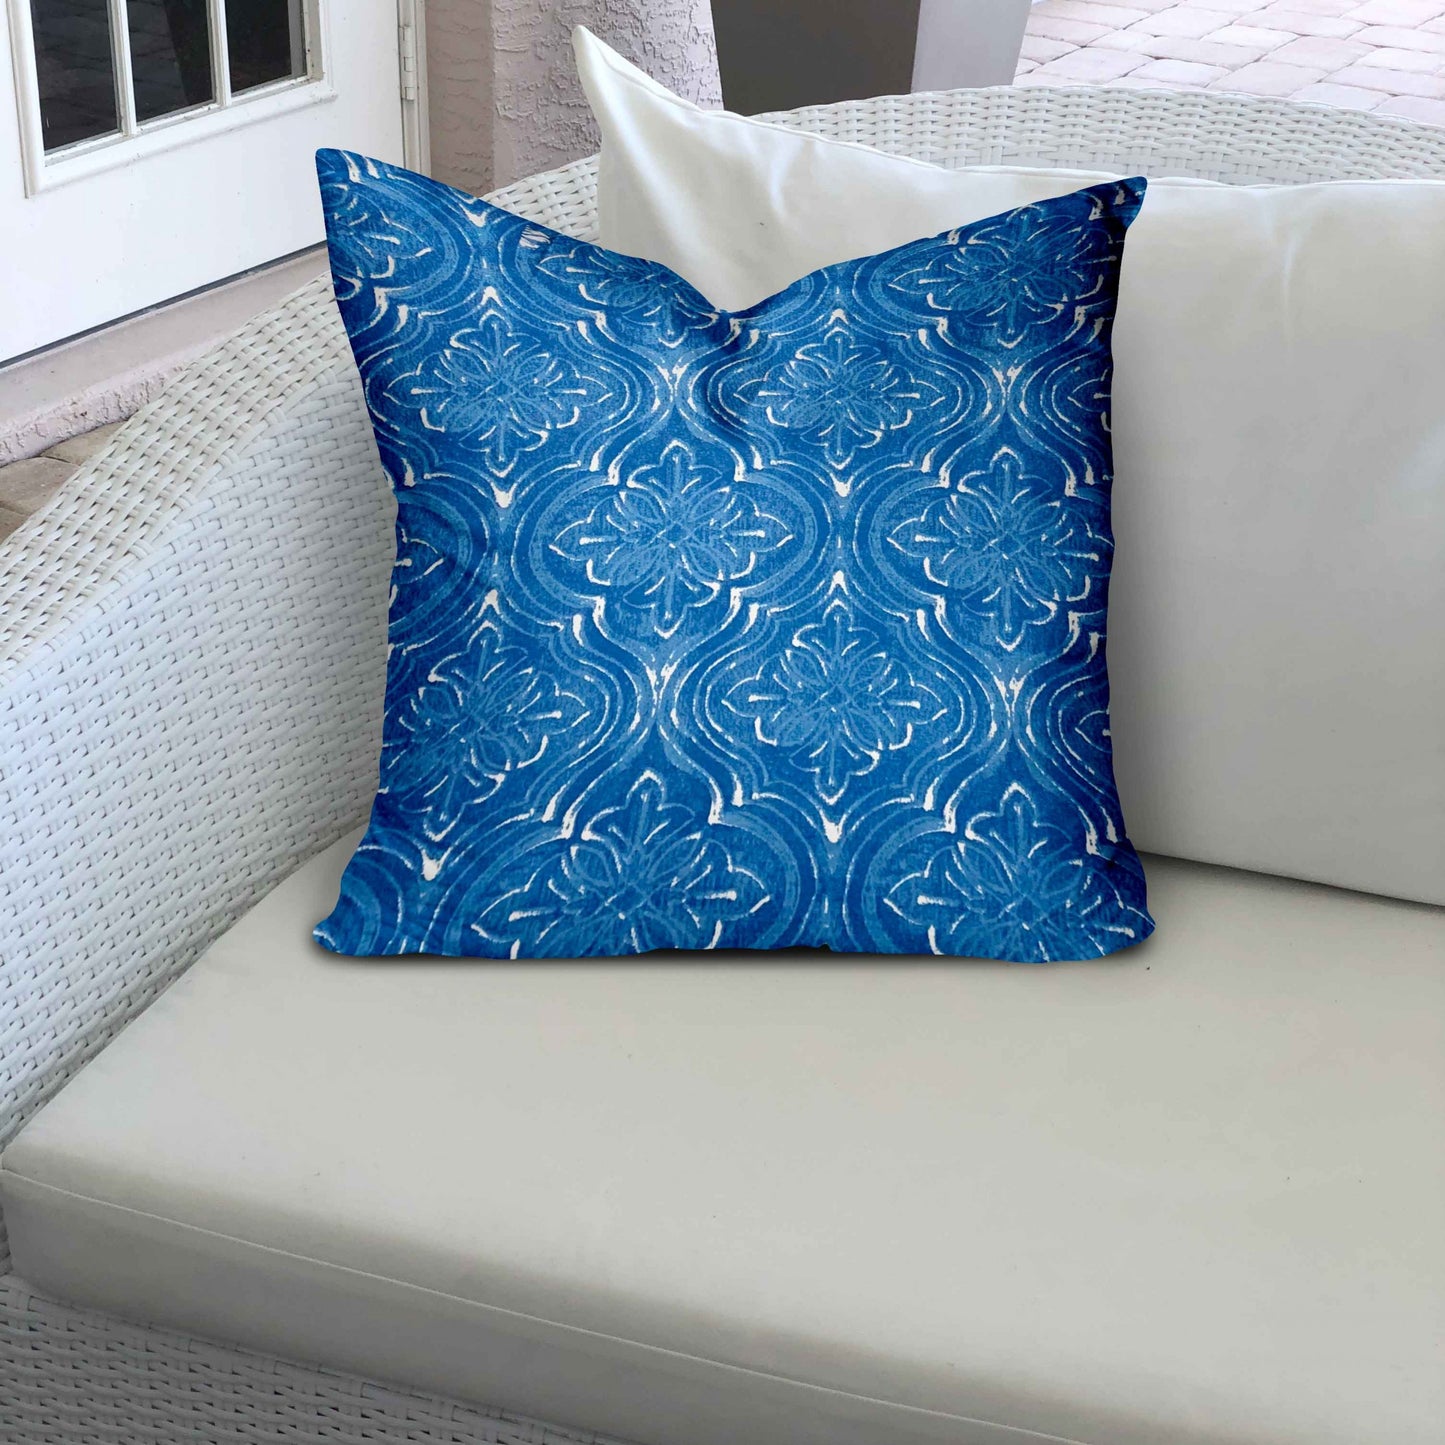 17" X 17" Blue And White Enveloped Ikat Throw Indoor Outdoor Pillow